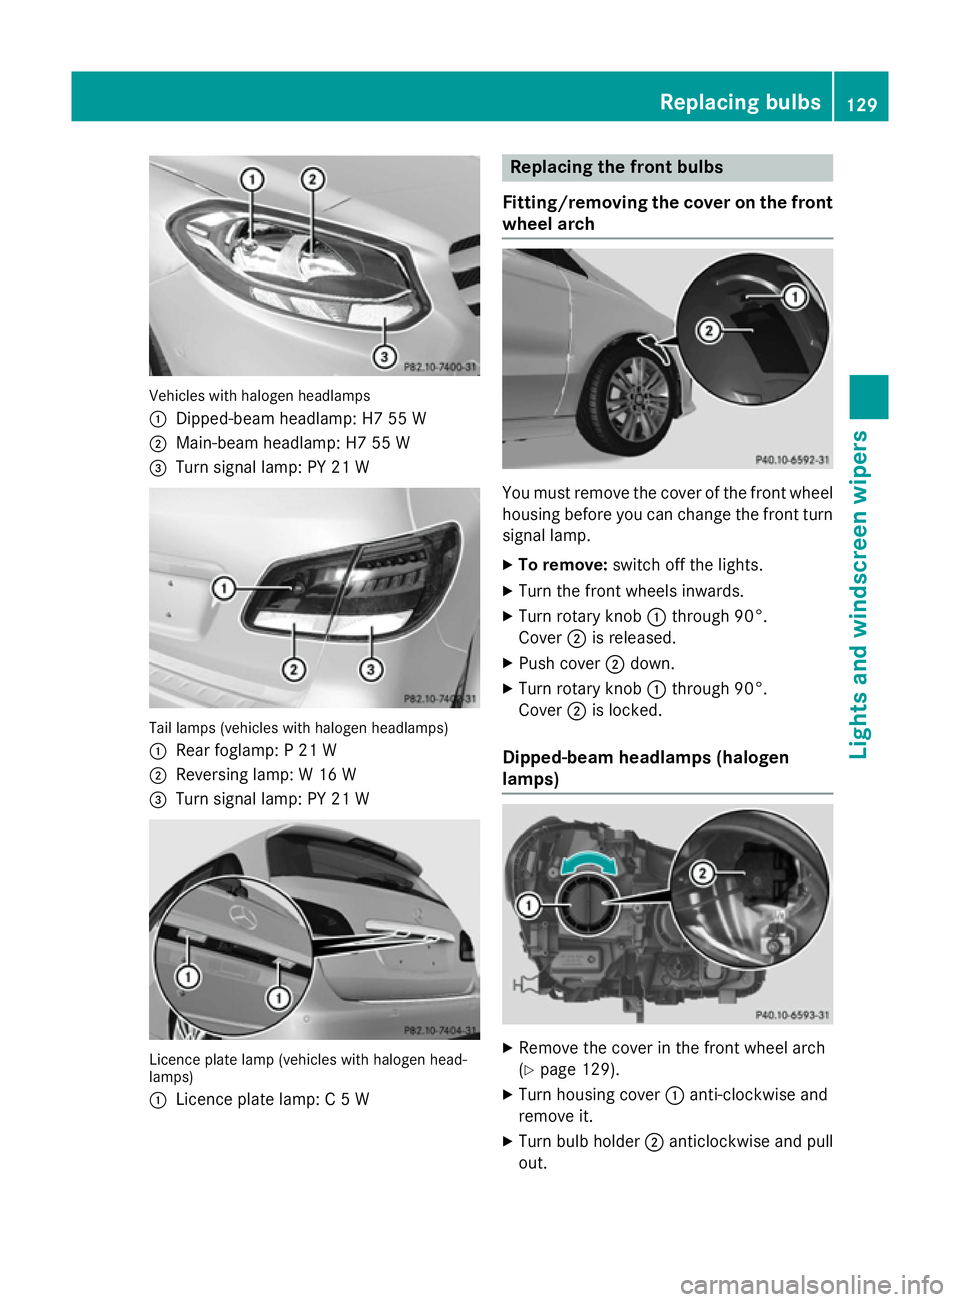 MERCEDES-BENZ B-CLASS HATCHBACK 2014  Owners Manual Vehicles with halogen headlamps
:
Dipped-beam headlamp: H7 55 W
; Main-beam headlamp: H7 55 W
= Turn signal lamp: PY 21 W Tail lamps (vehicles with halogen headlamps)
: Rear foglamp: P 21 W
; Reversin